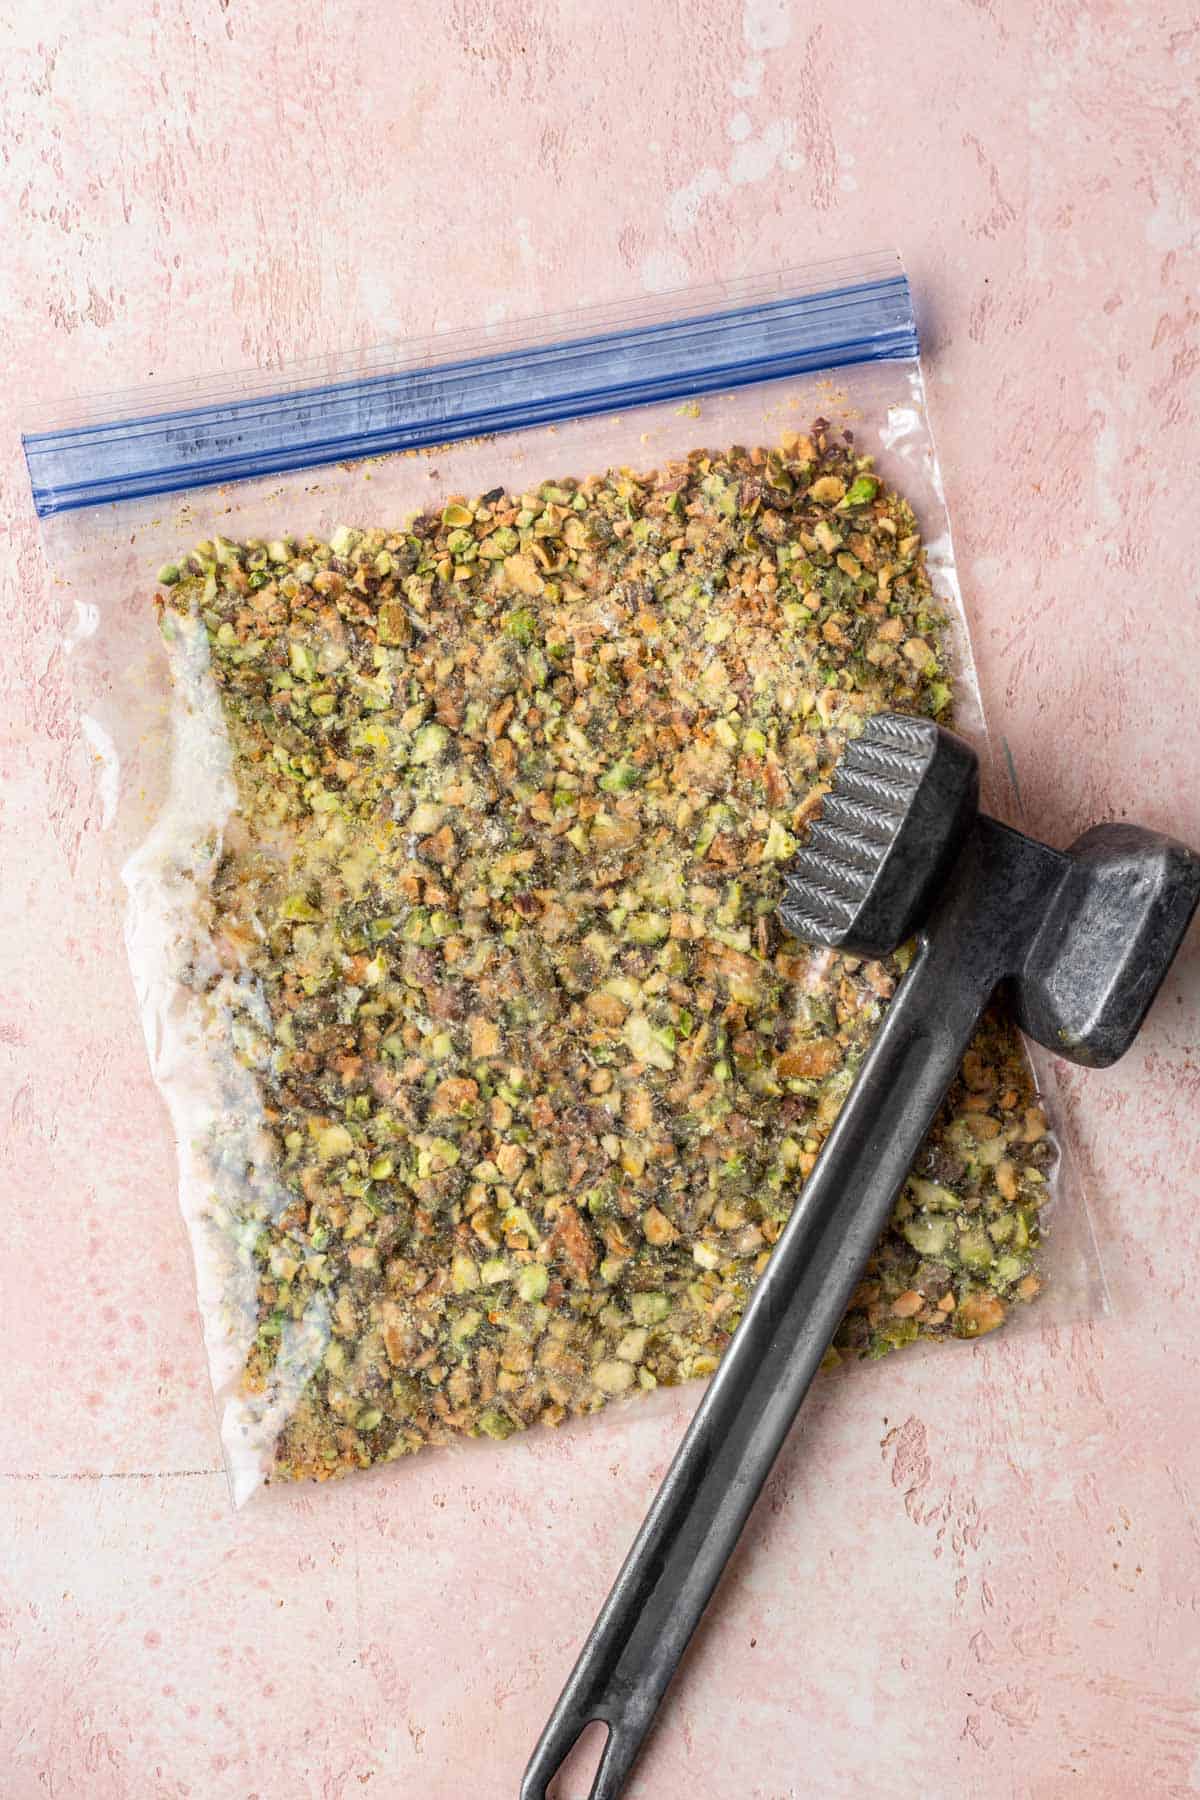 Pistachios in a zip top bag crushed with a meat mallet.